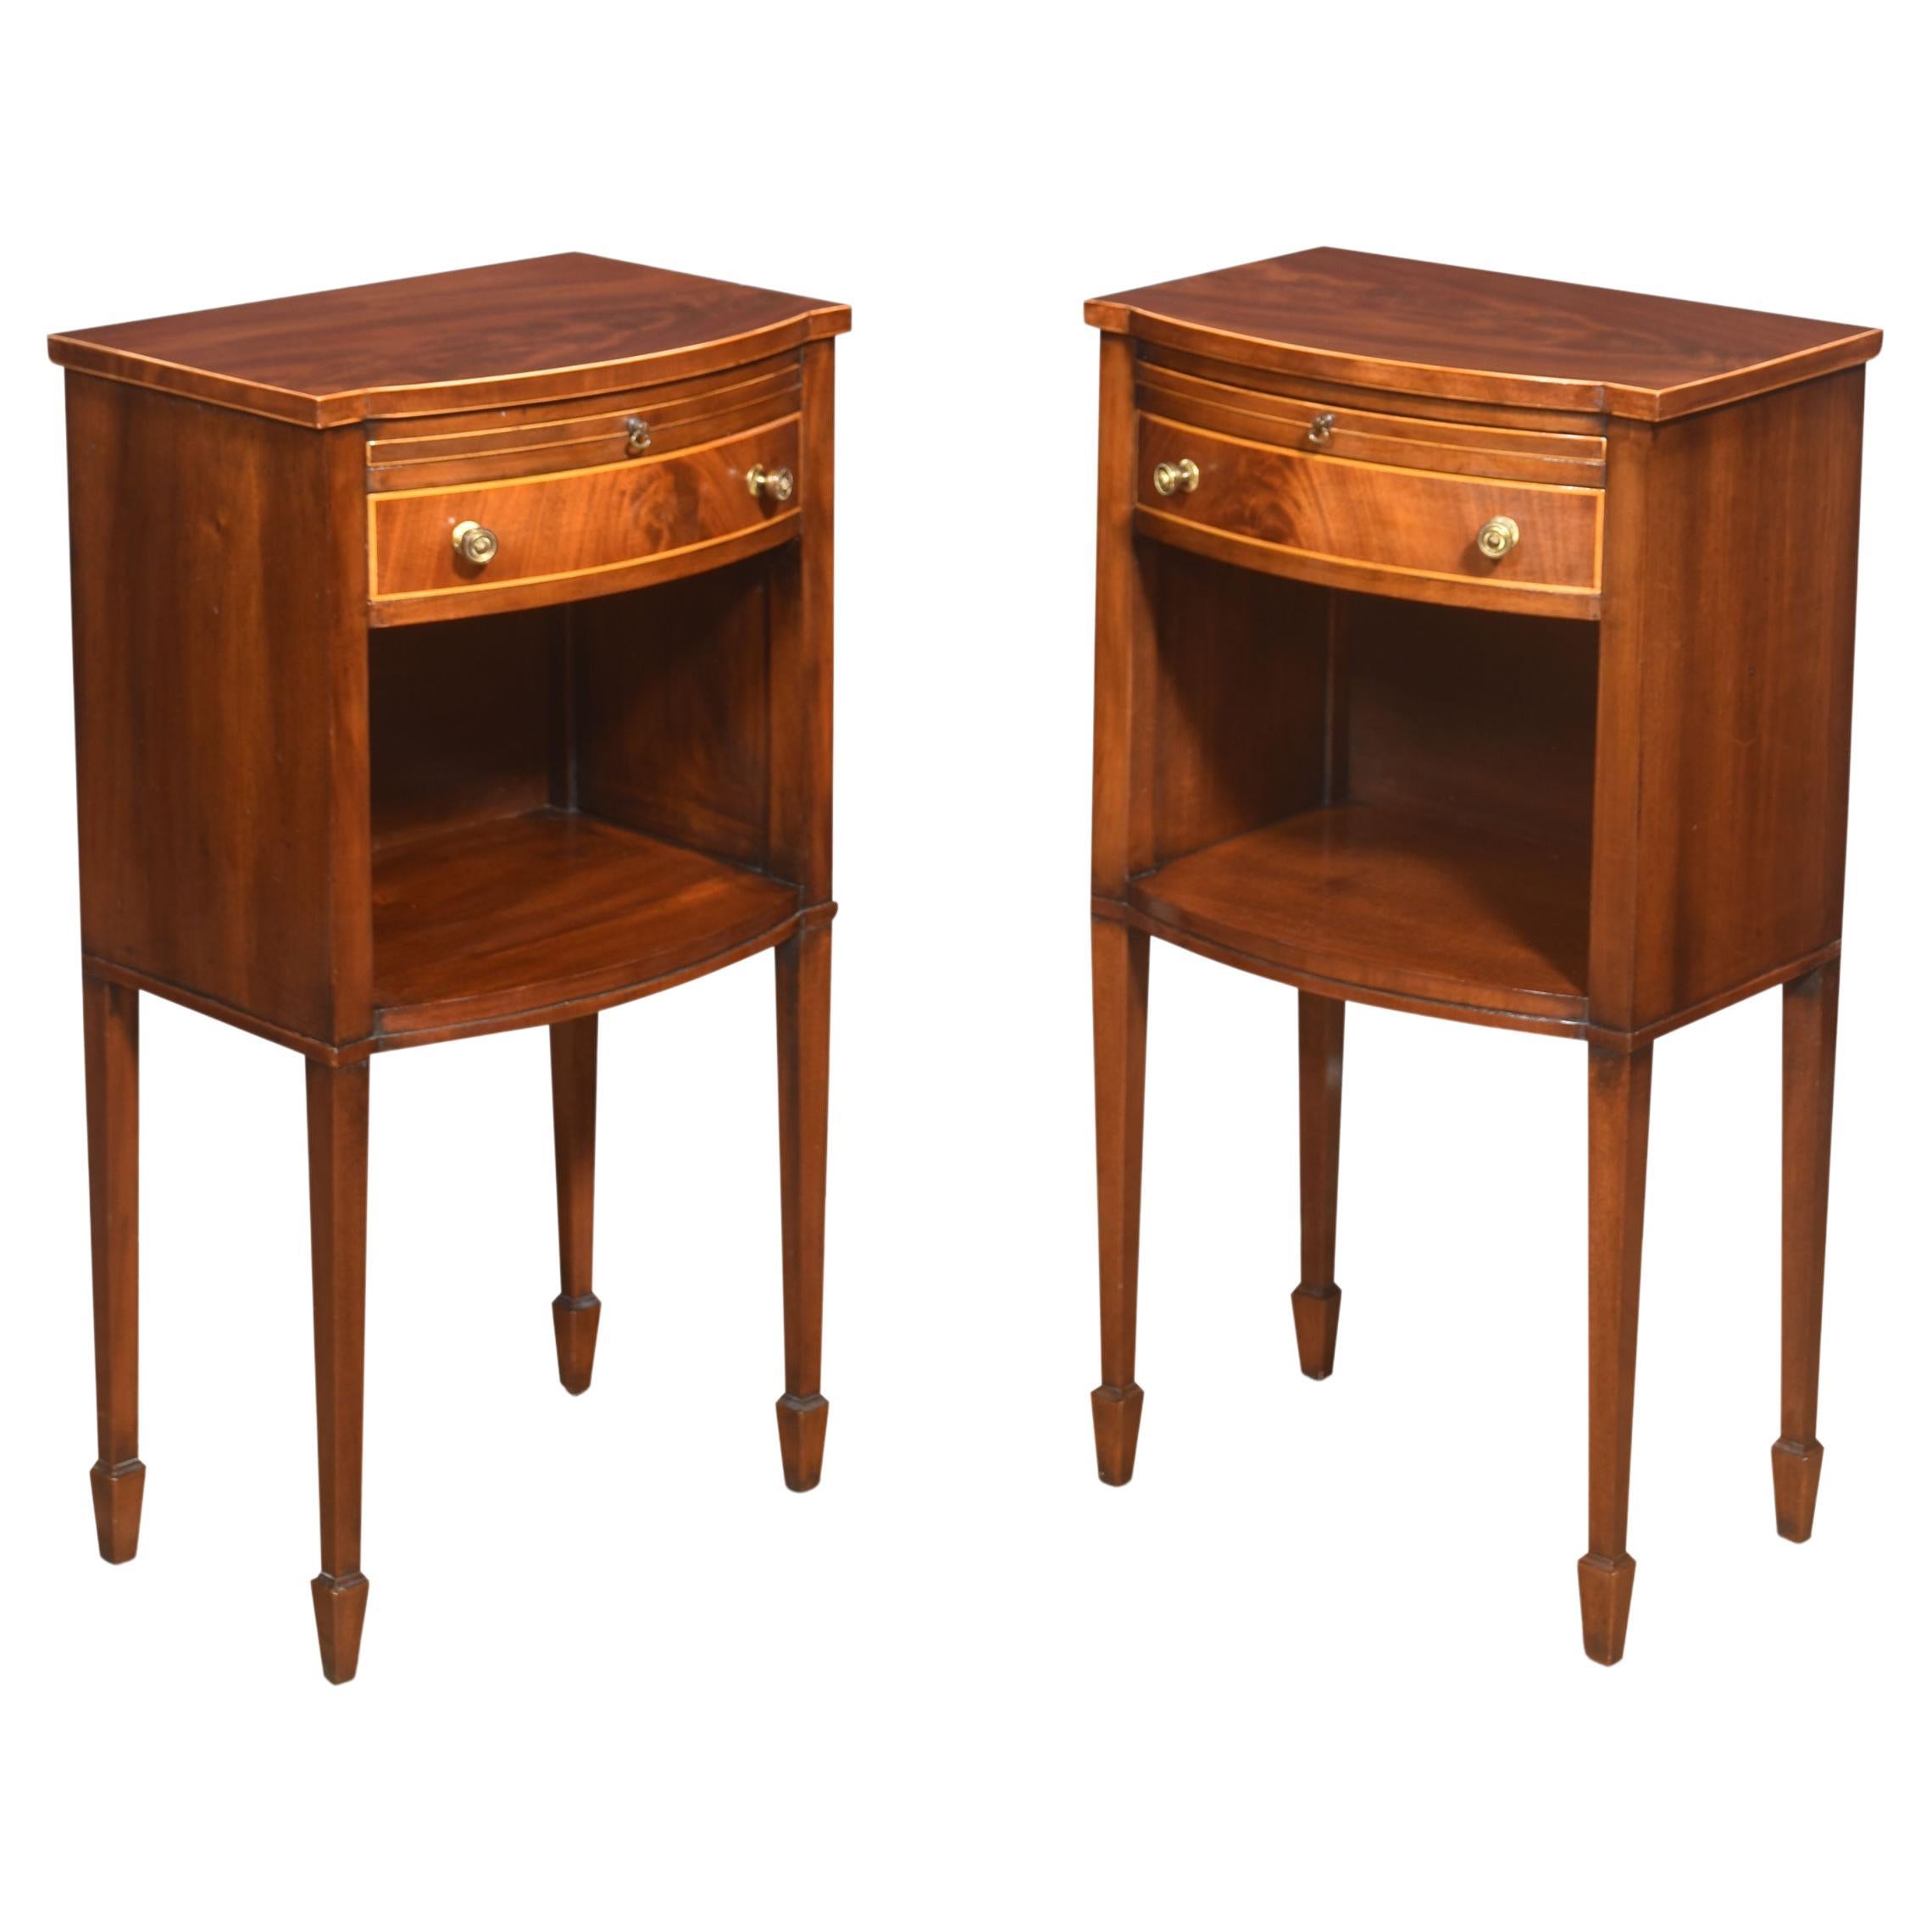 Pair of string inlaid bedside table